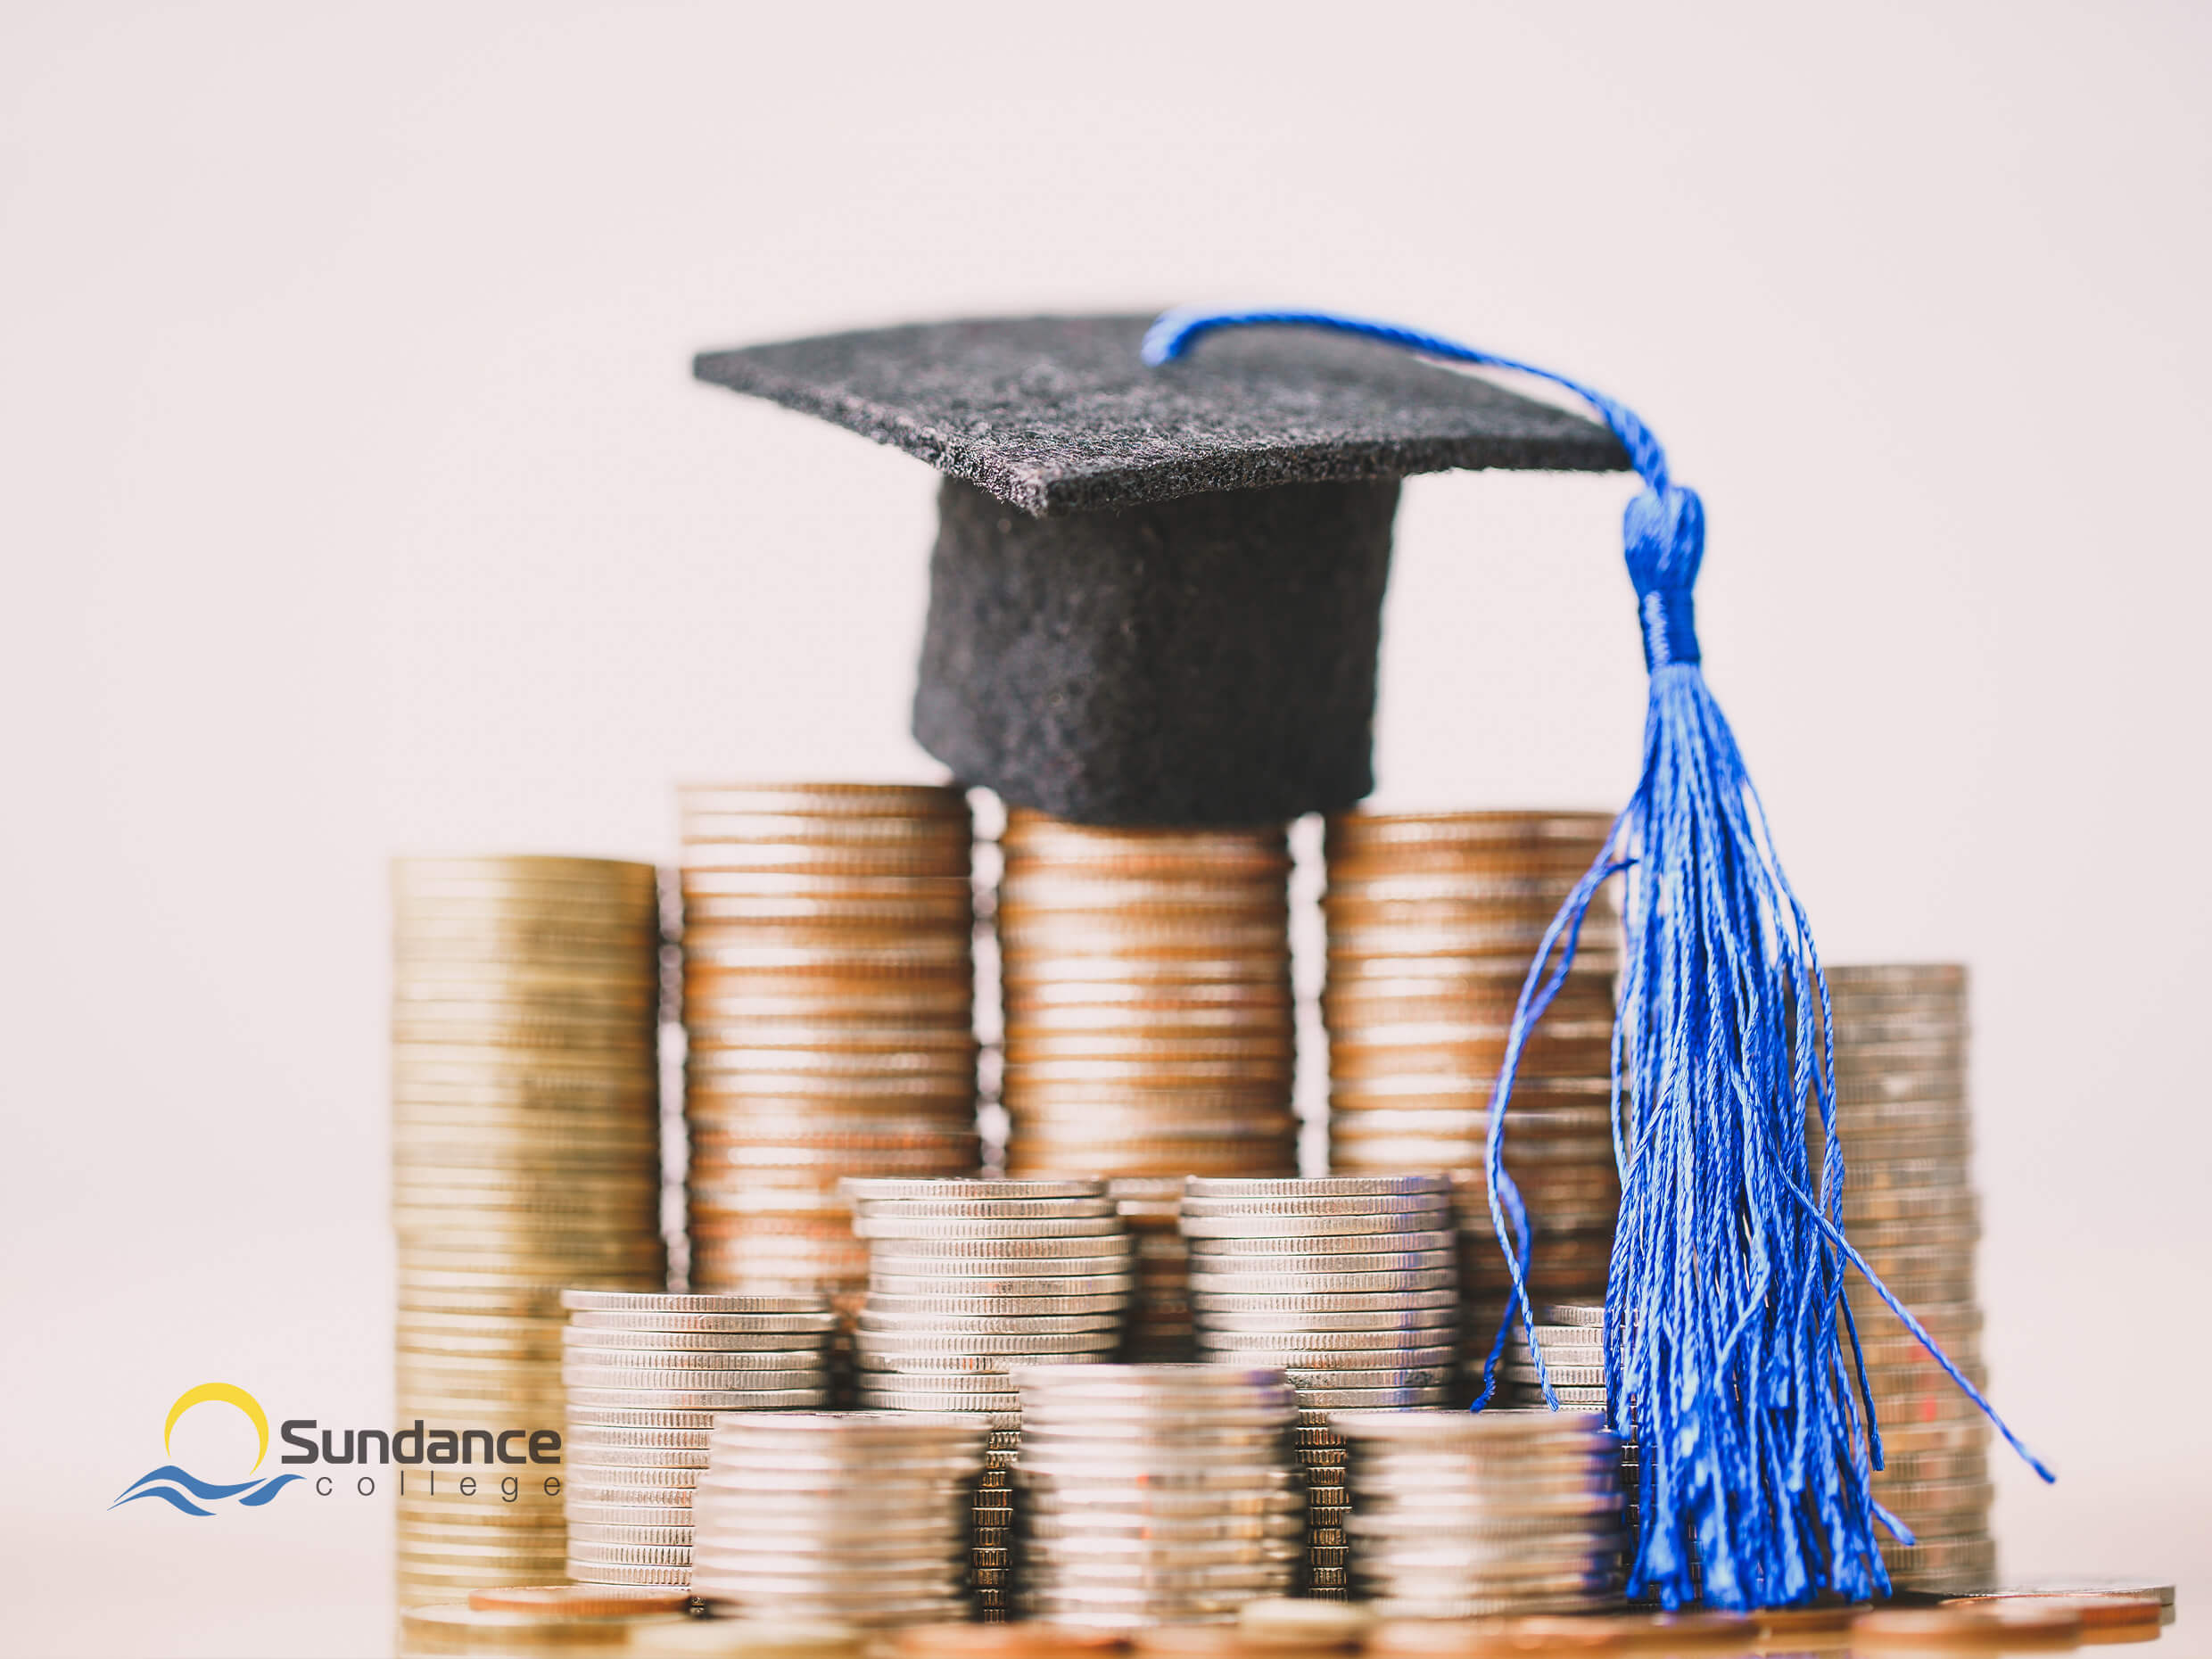 A closeup of a miniature graduation cap sitting on a stack of coins, symbolizing the value payroll administrators provide to organizations through their payroll diploma